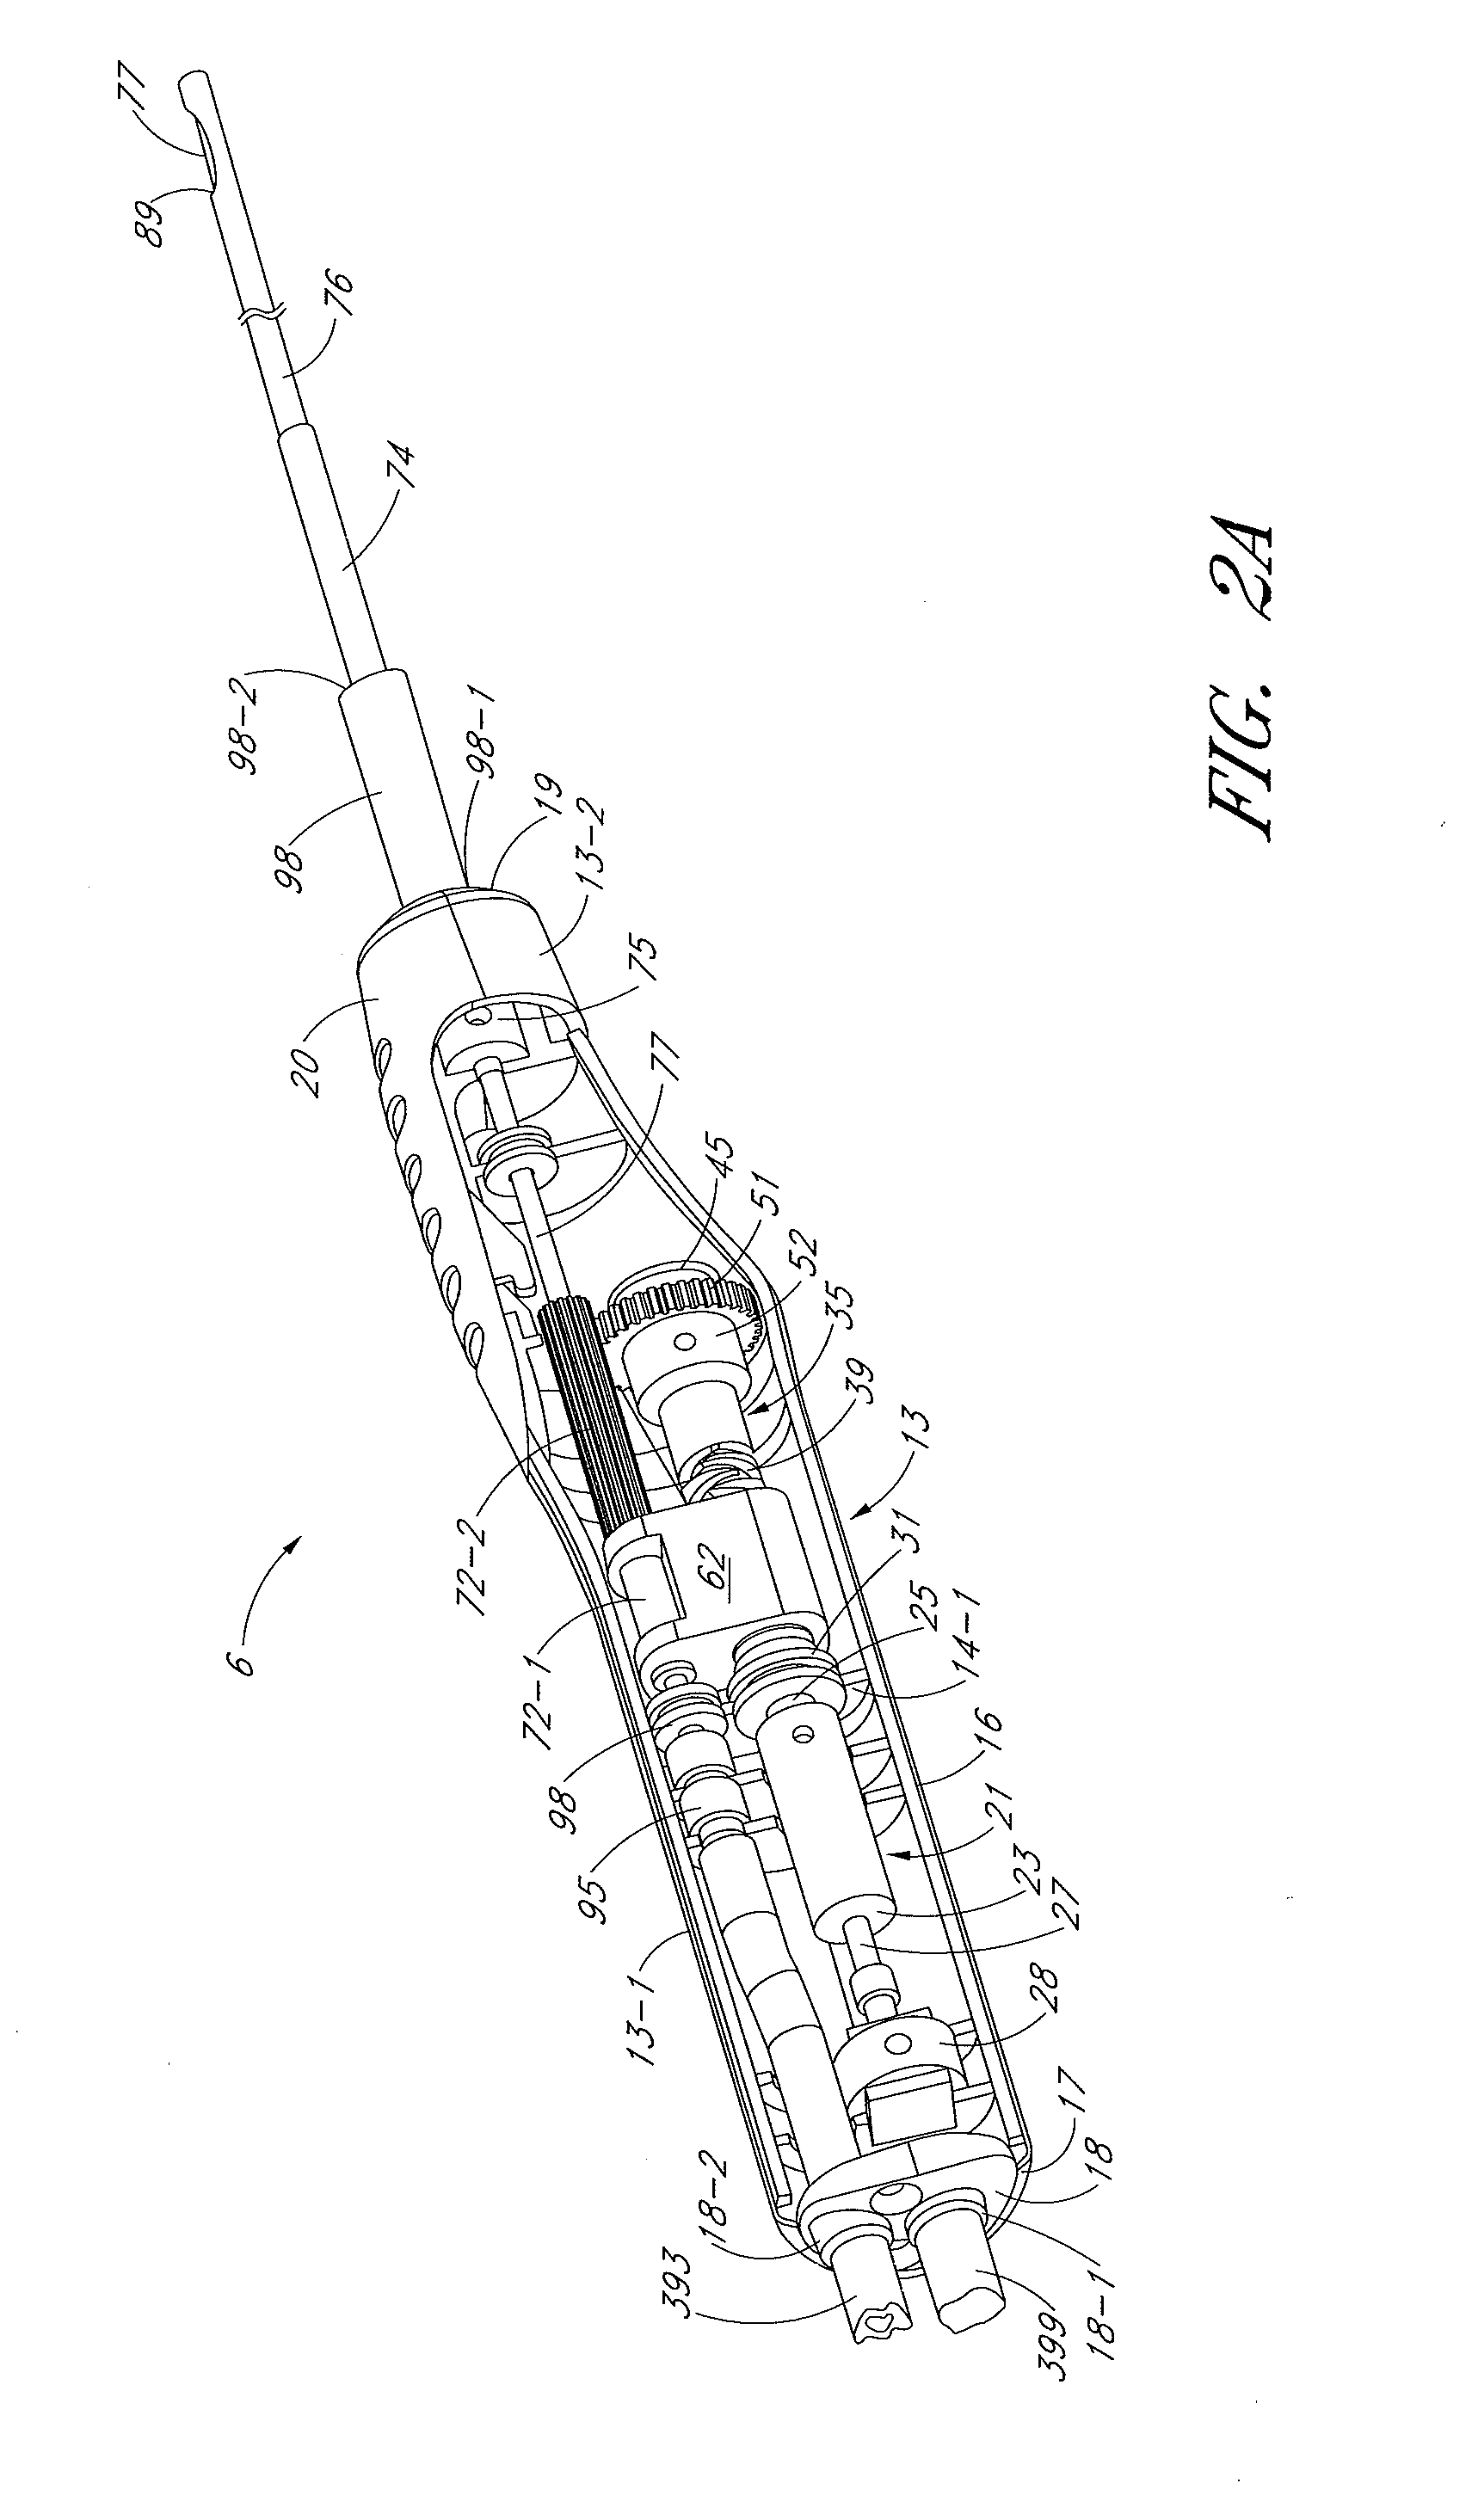 Access device with enhanced working channel